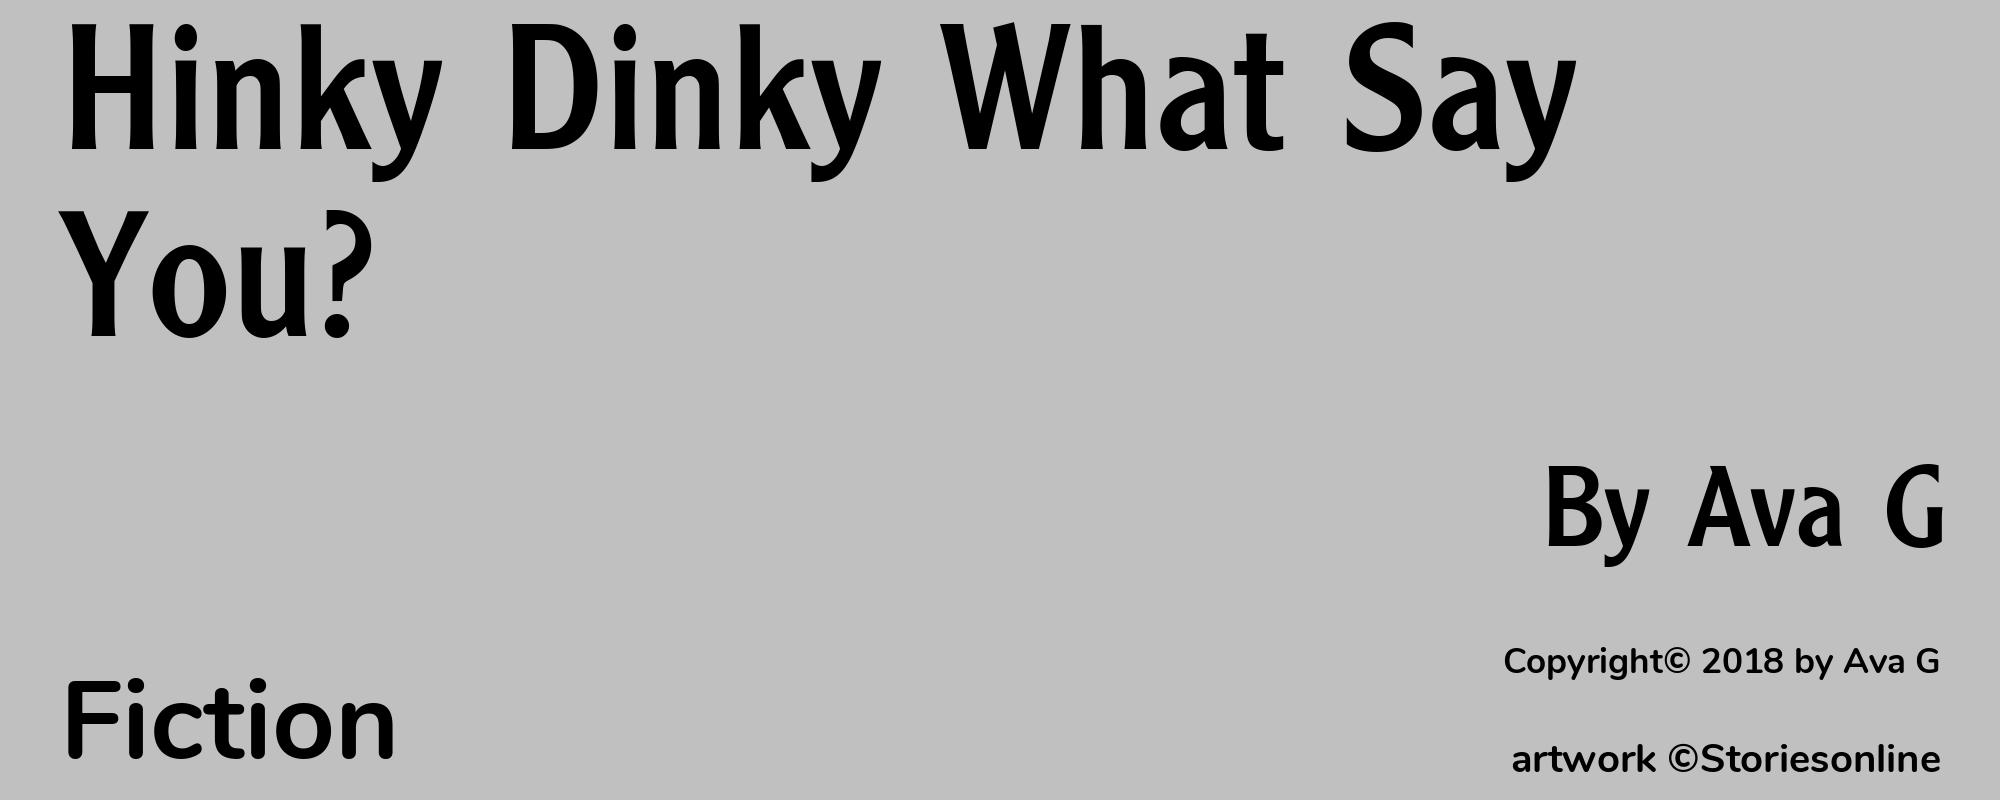 Hinky Dinky What Say You? - Cover